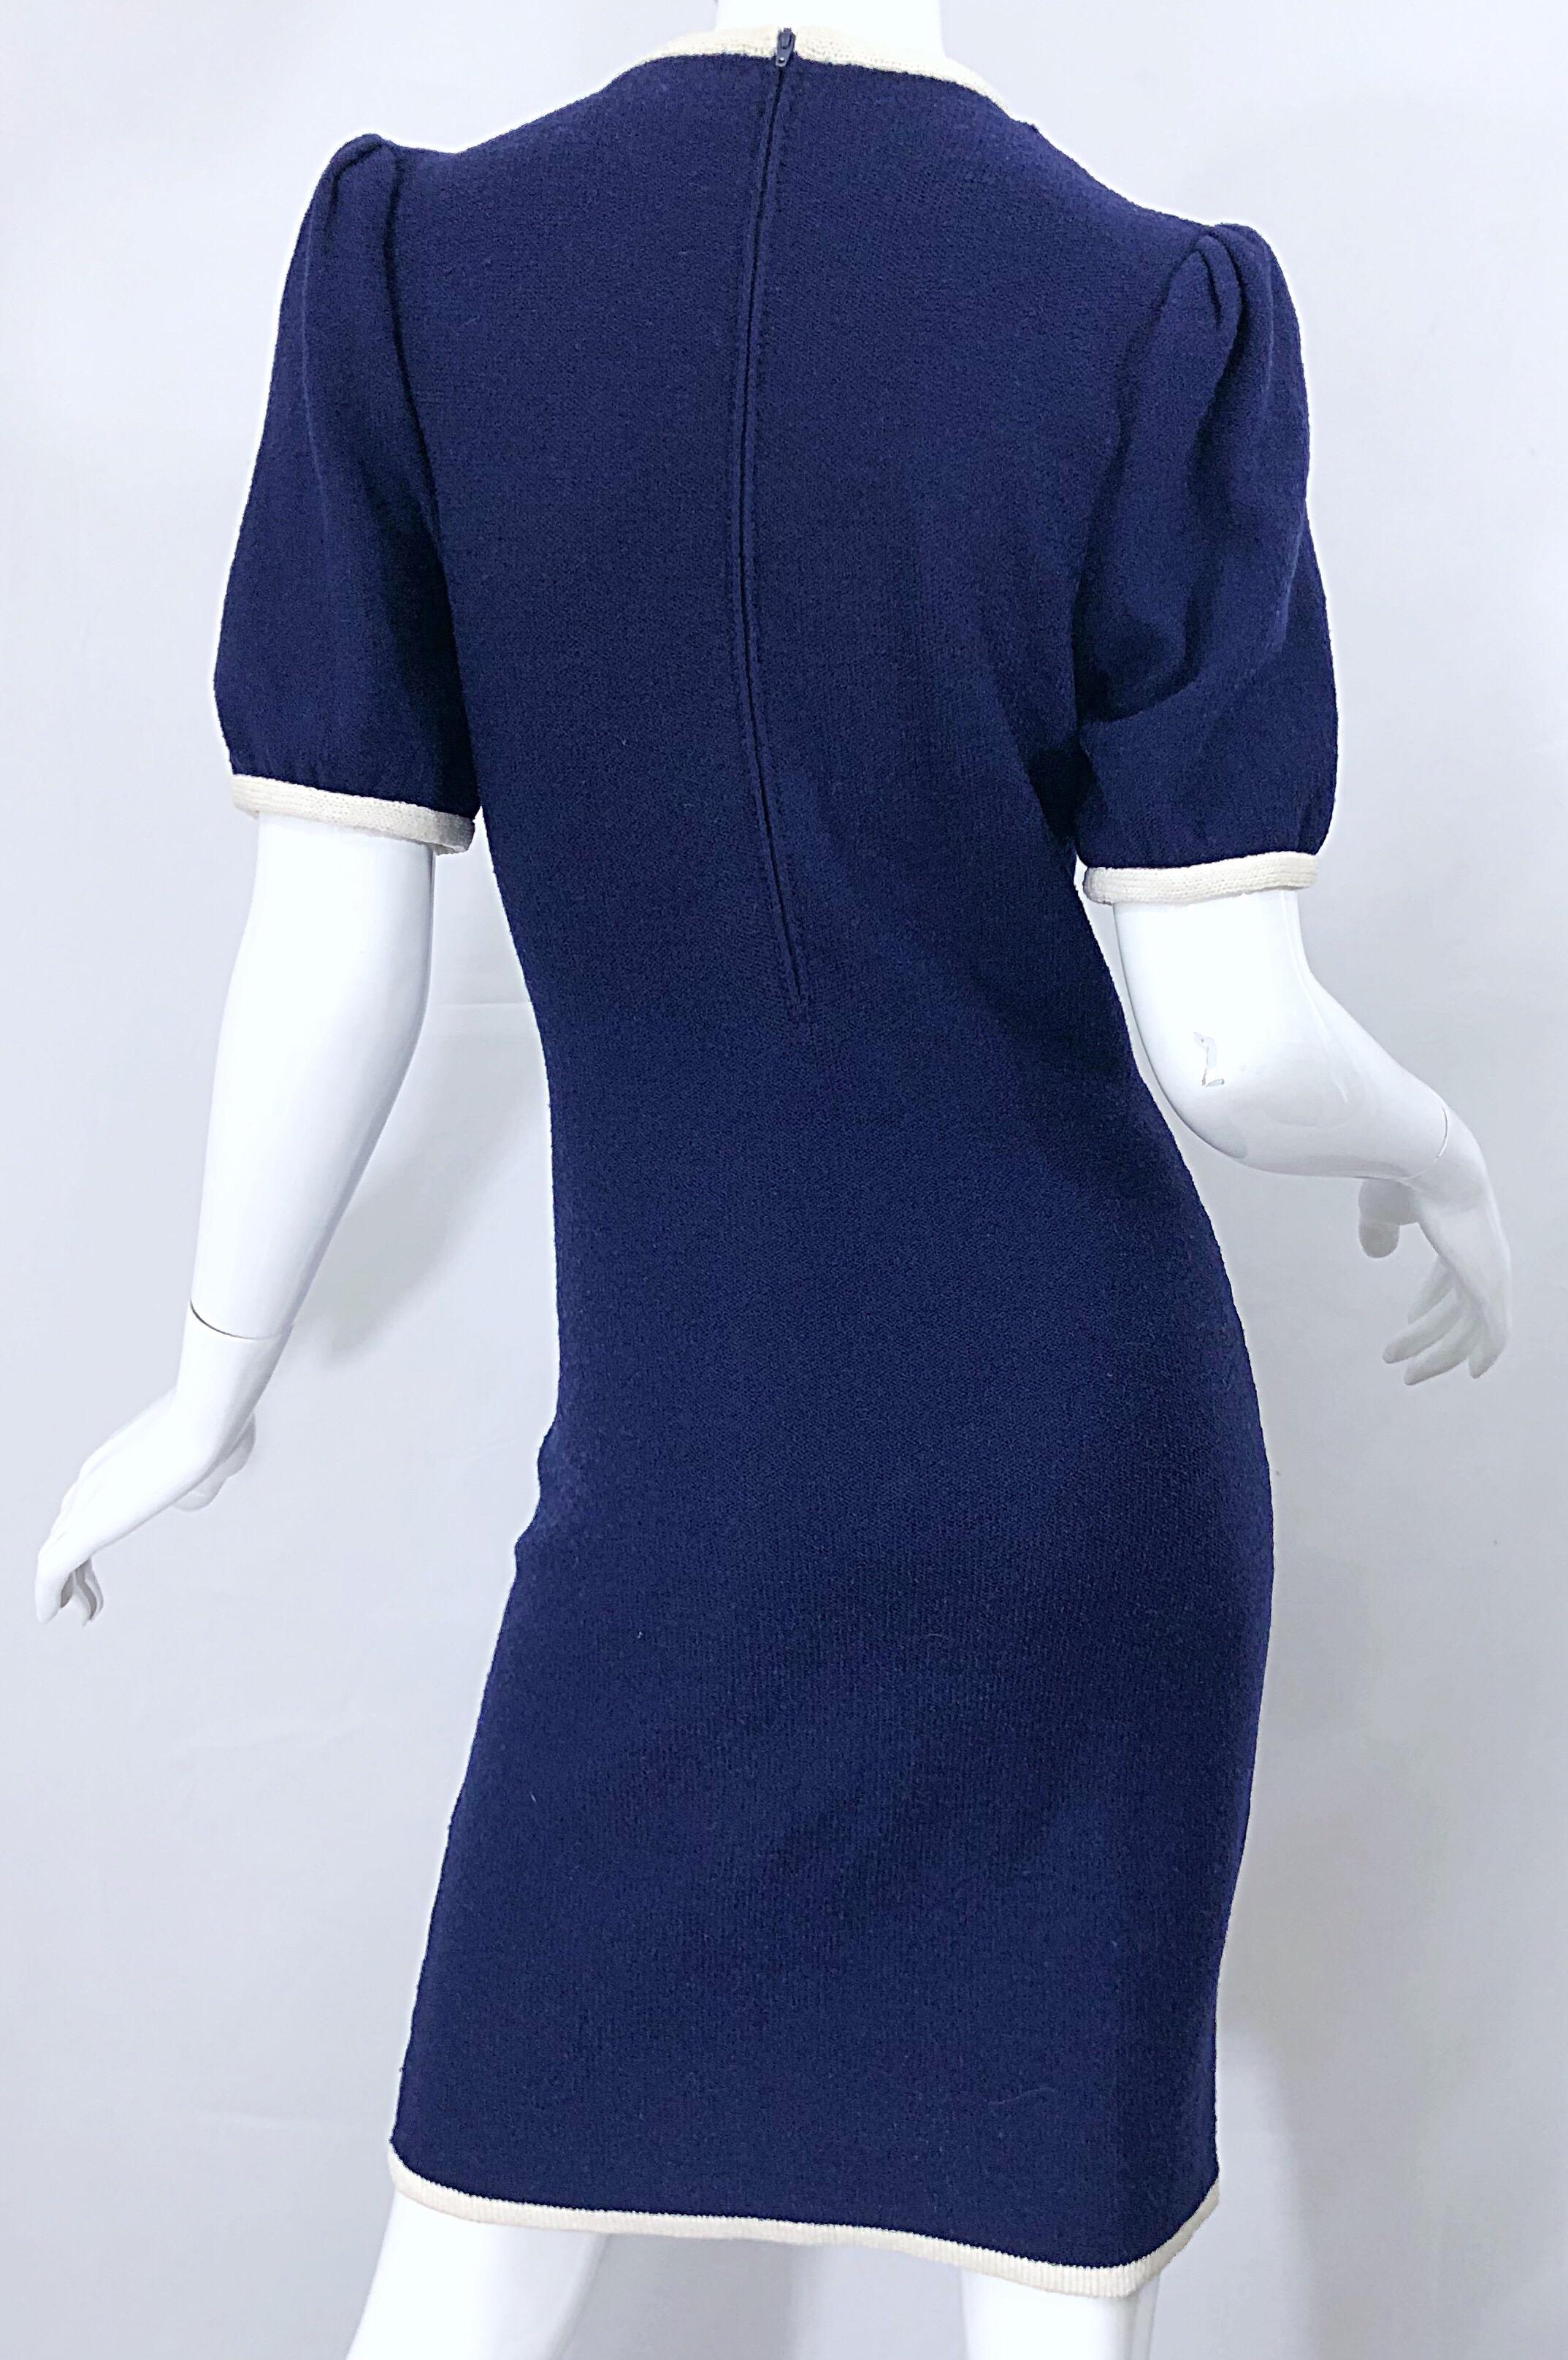 Vintage Adolfo for Saks 5th Avenue Navy Blue and White Nautical Knit Dress 5